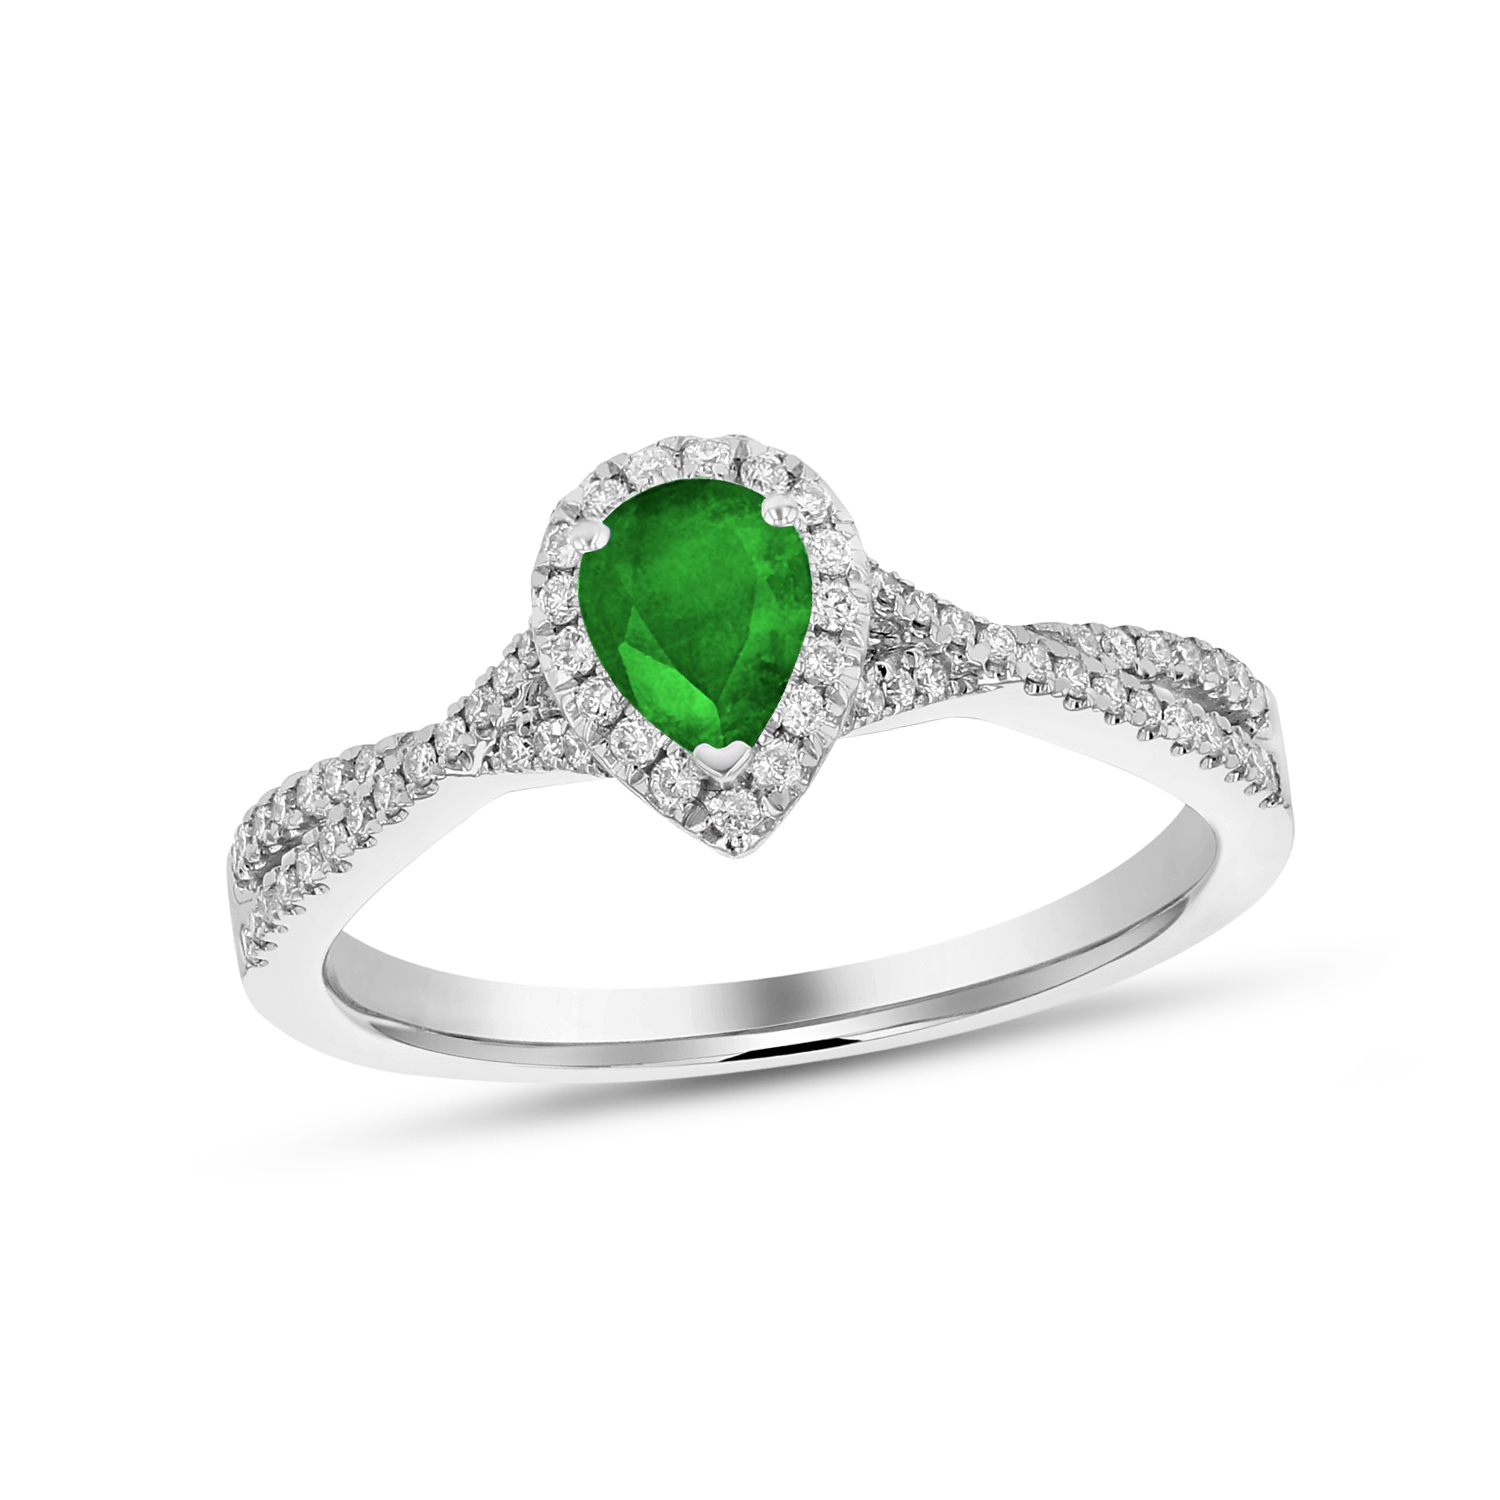 View 0.67ctw Diamnd and Pear Shaped Emerald Ring in 18k White Gold